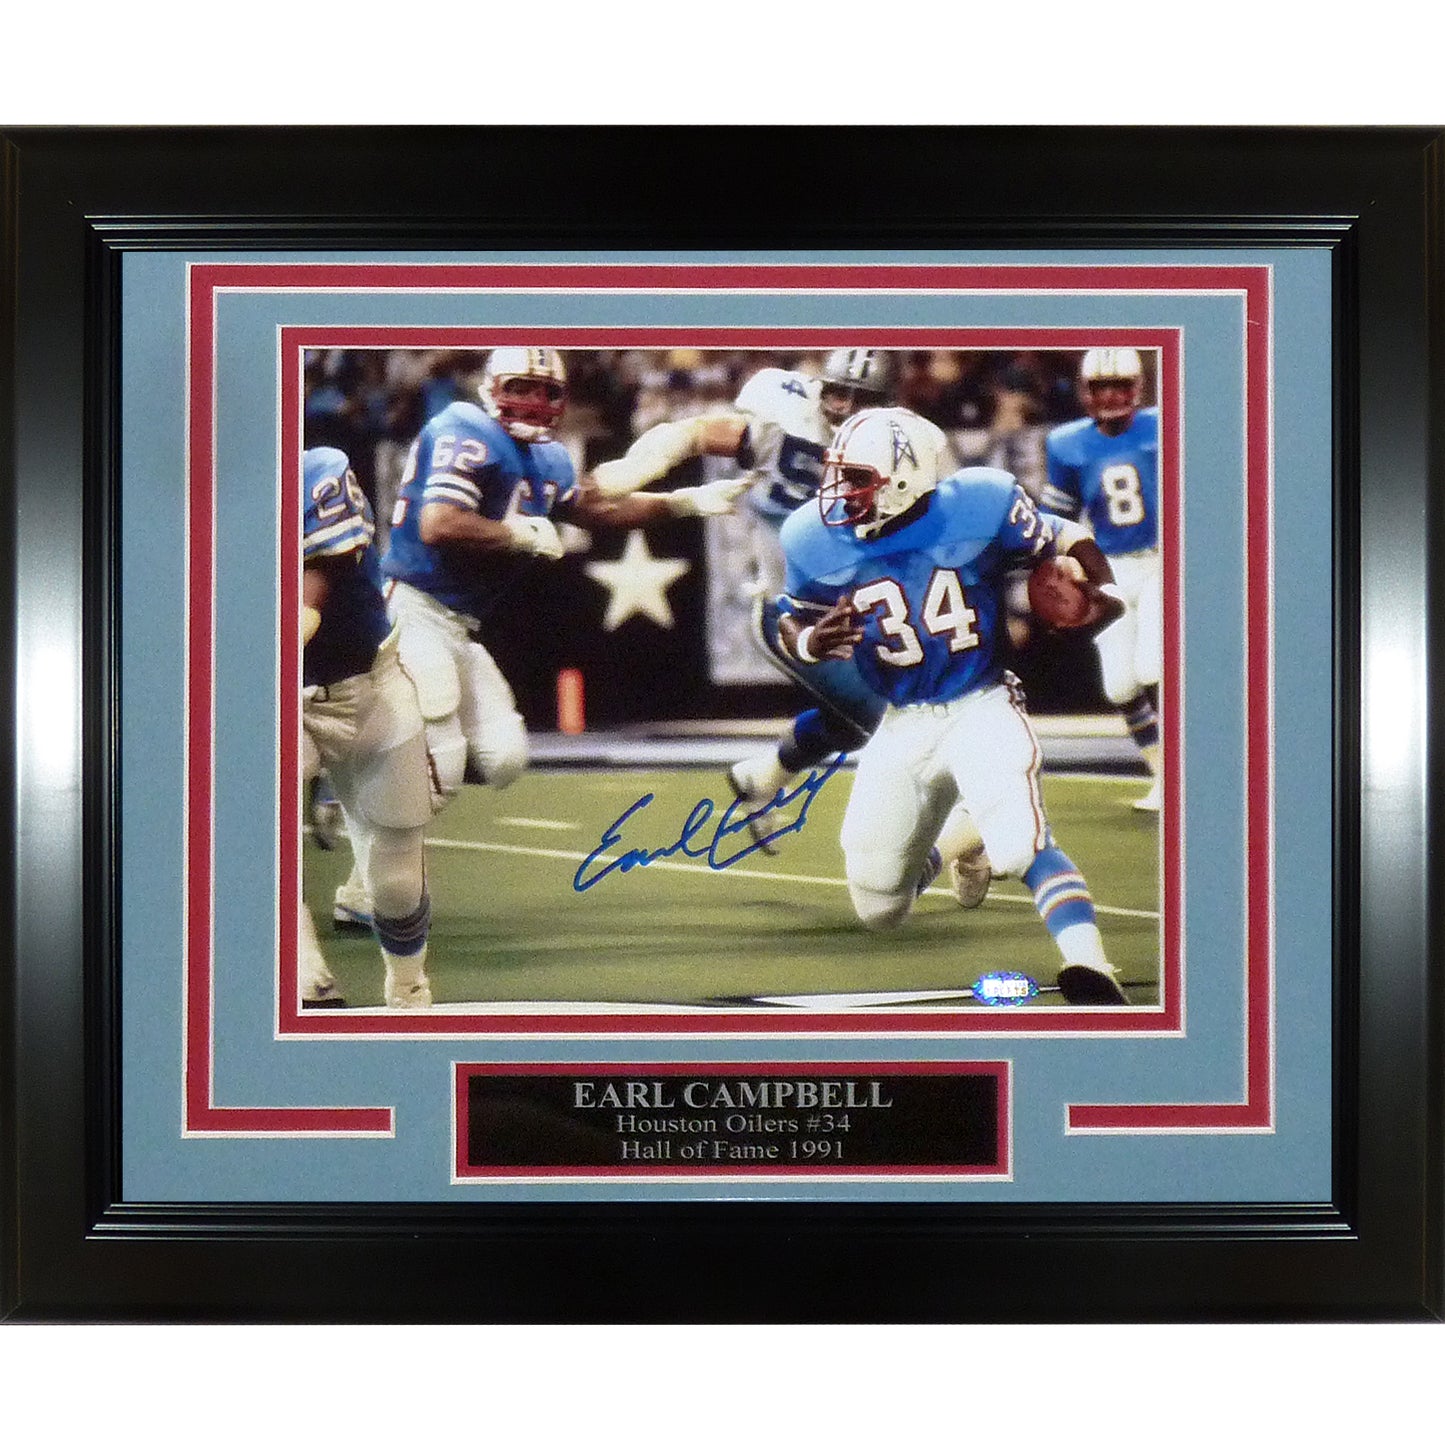 Earl Campbell Autographed Houston Oilers (Horiz Action) Framed 8x10 Photo